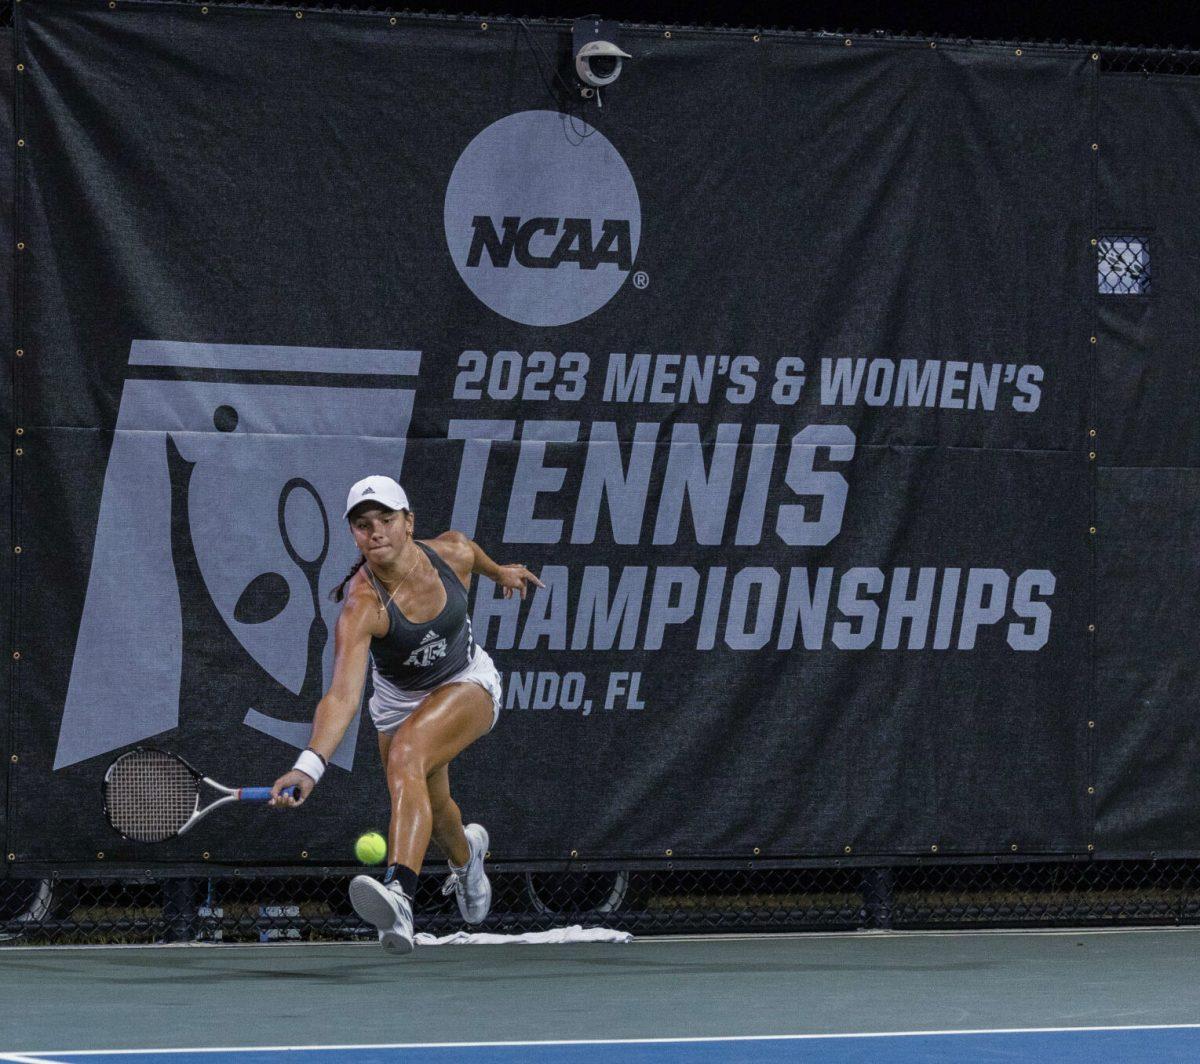 Freshman+Mia+Kupres+hits+the+ball+underhand+during+a+game+vs.+Stanford+at+the+NCAA+Womens+tennis+quarterfinals+in+Orlando%2C+Florida+on+Wednesday%2C+May+17%2C+2023.